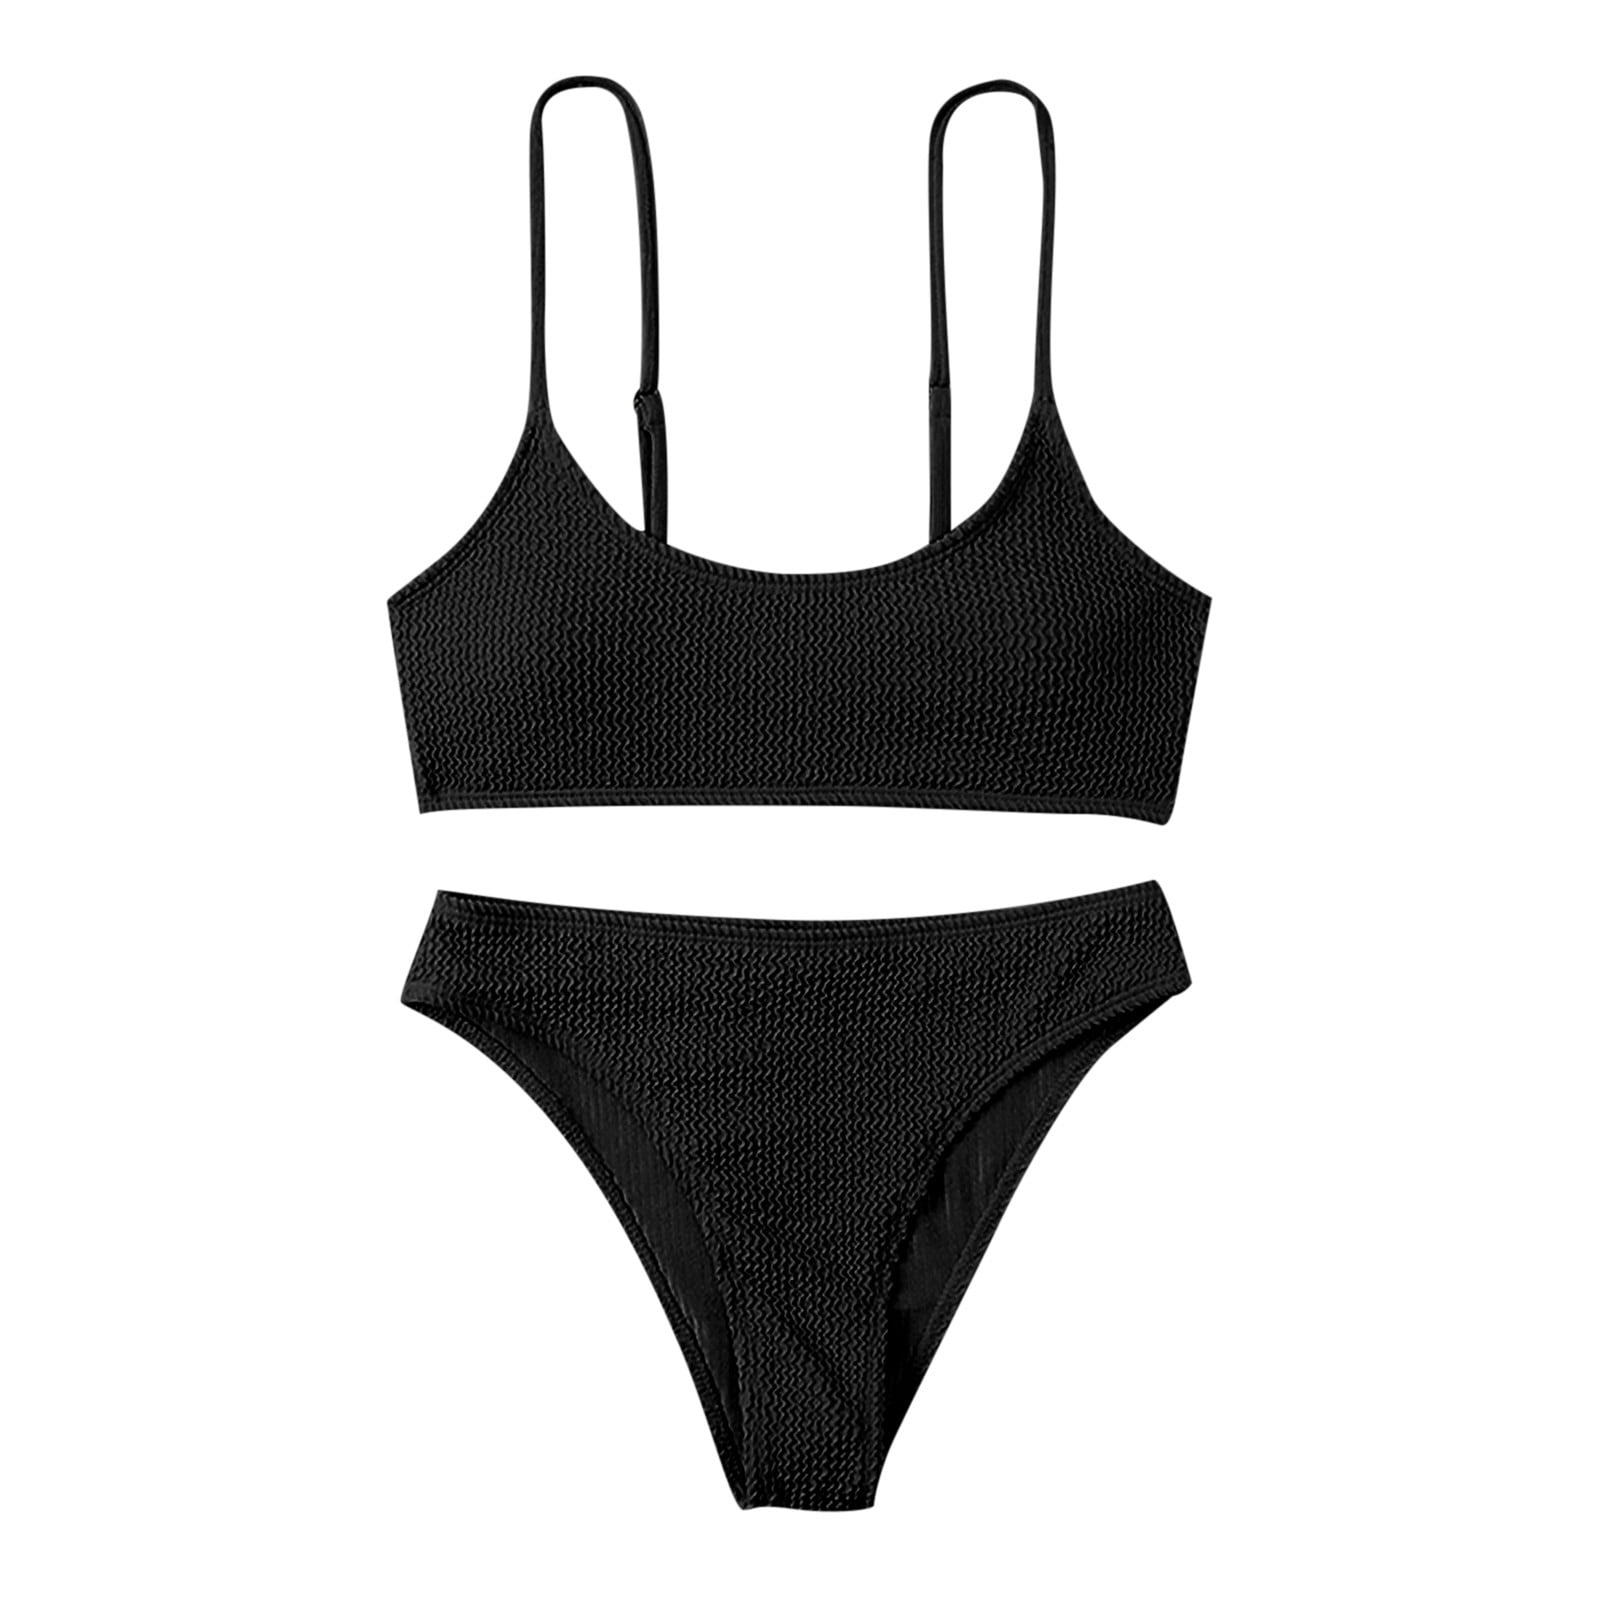 EHQJNJ Tankini Bathing Suits for Women Two Piece Women's High Waisted  Bikini V Neck Strap Color Embellishment Swimsuit Two Pieces Lace up Bathing  Suit